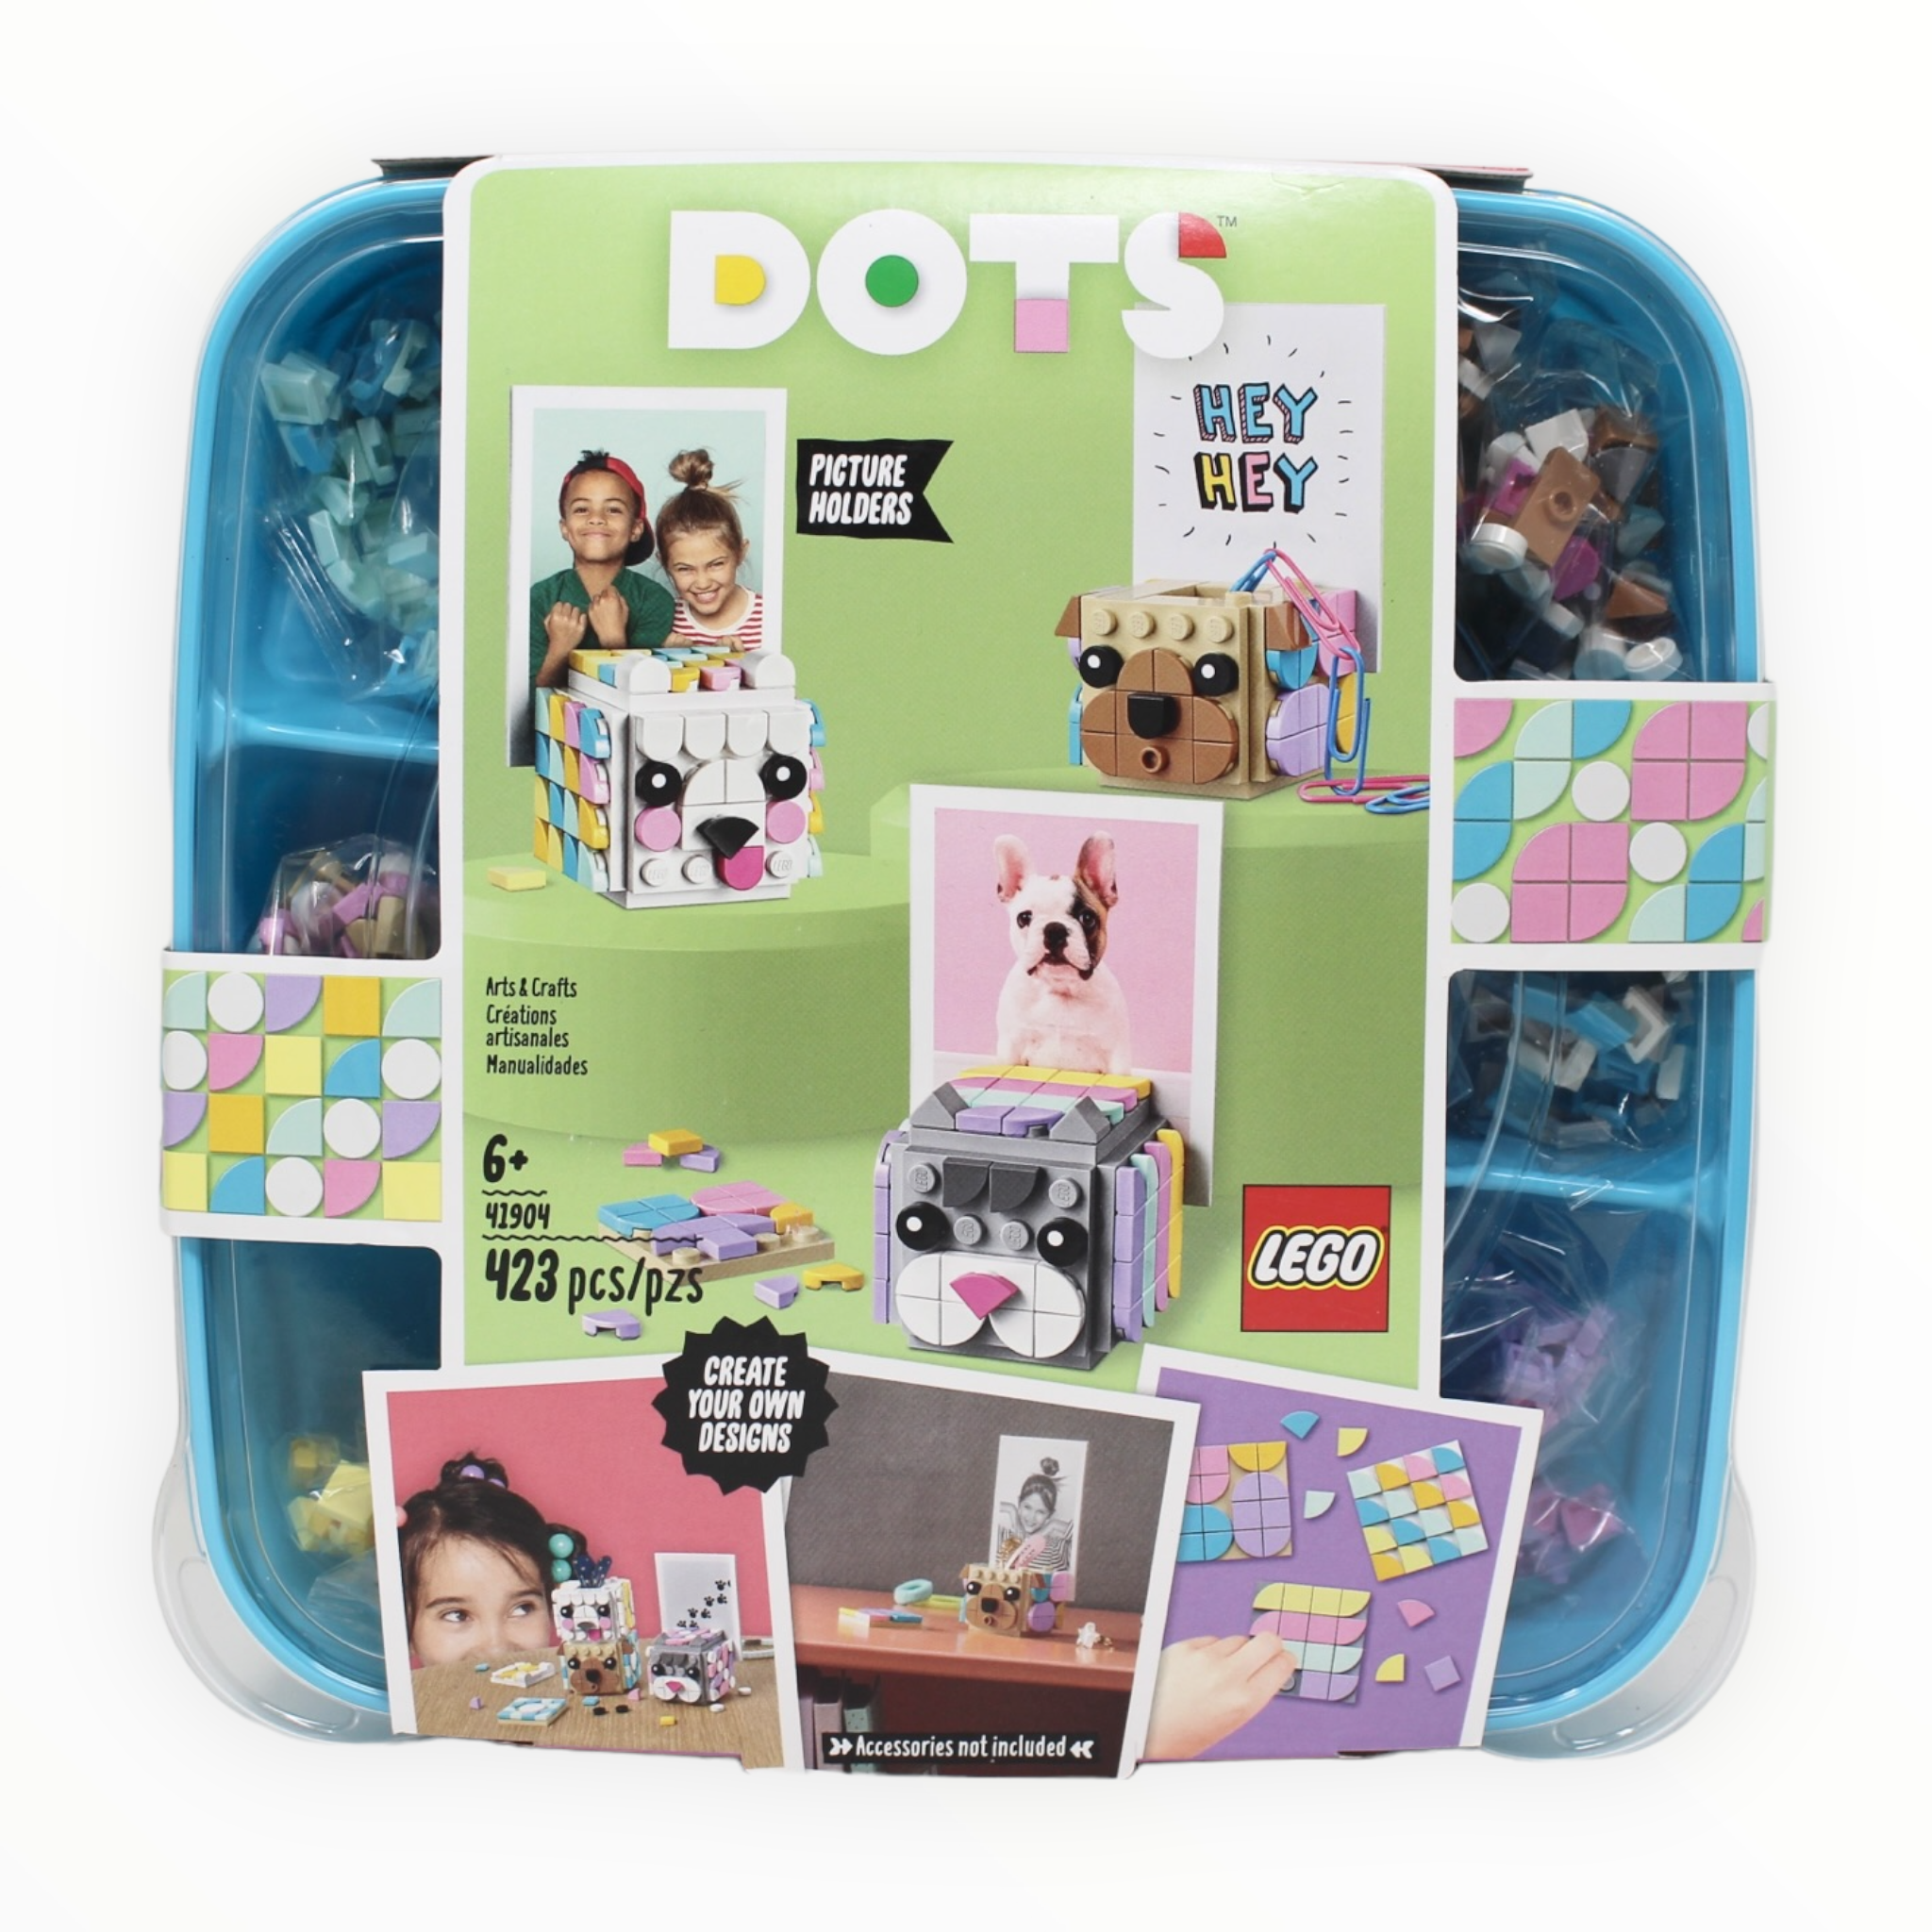 Retired Set 41904 DOTS Picture Holders